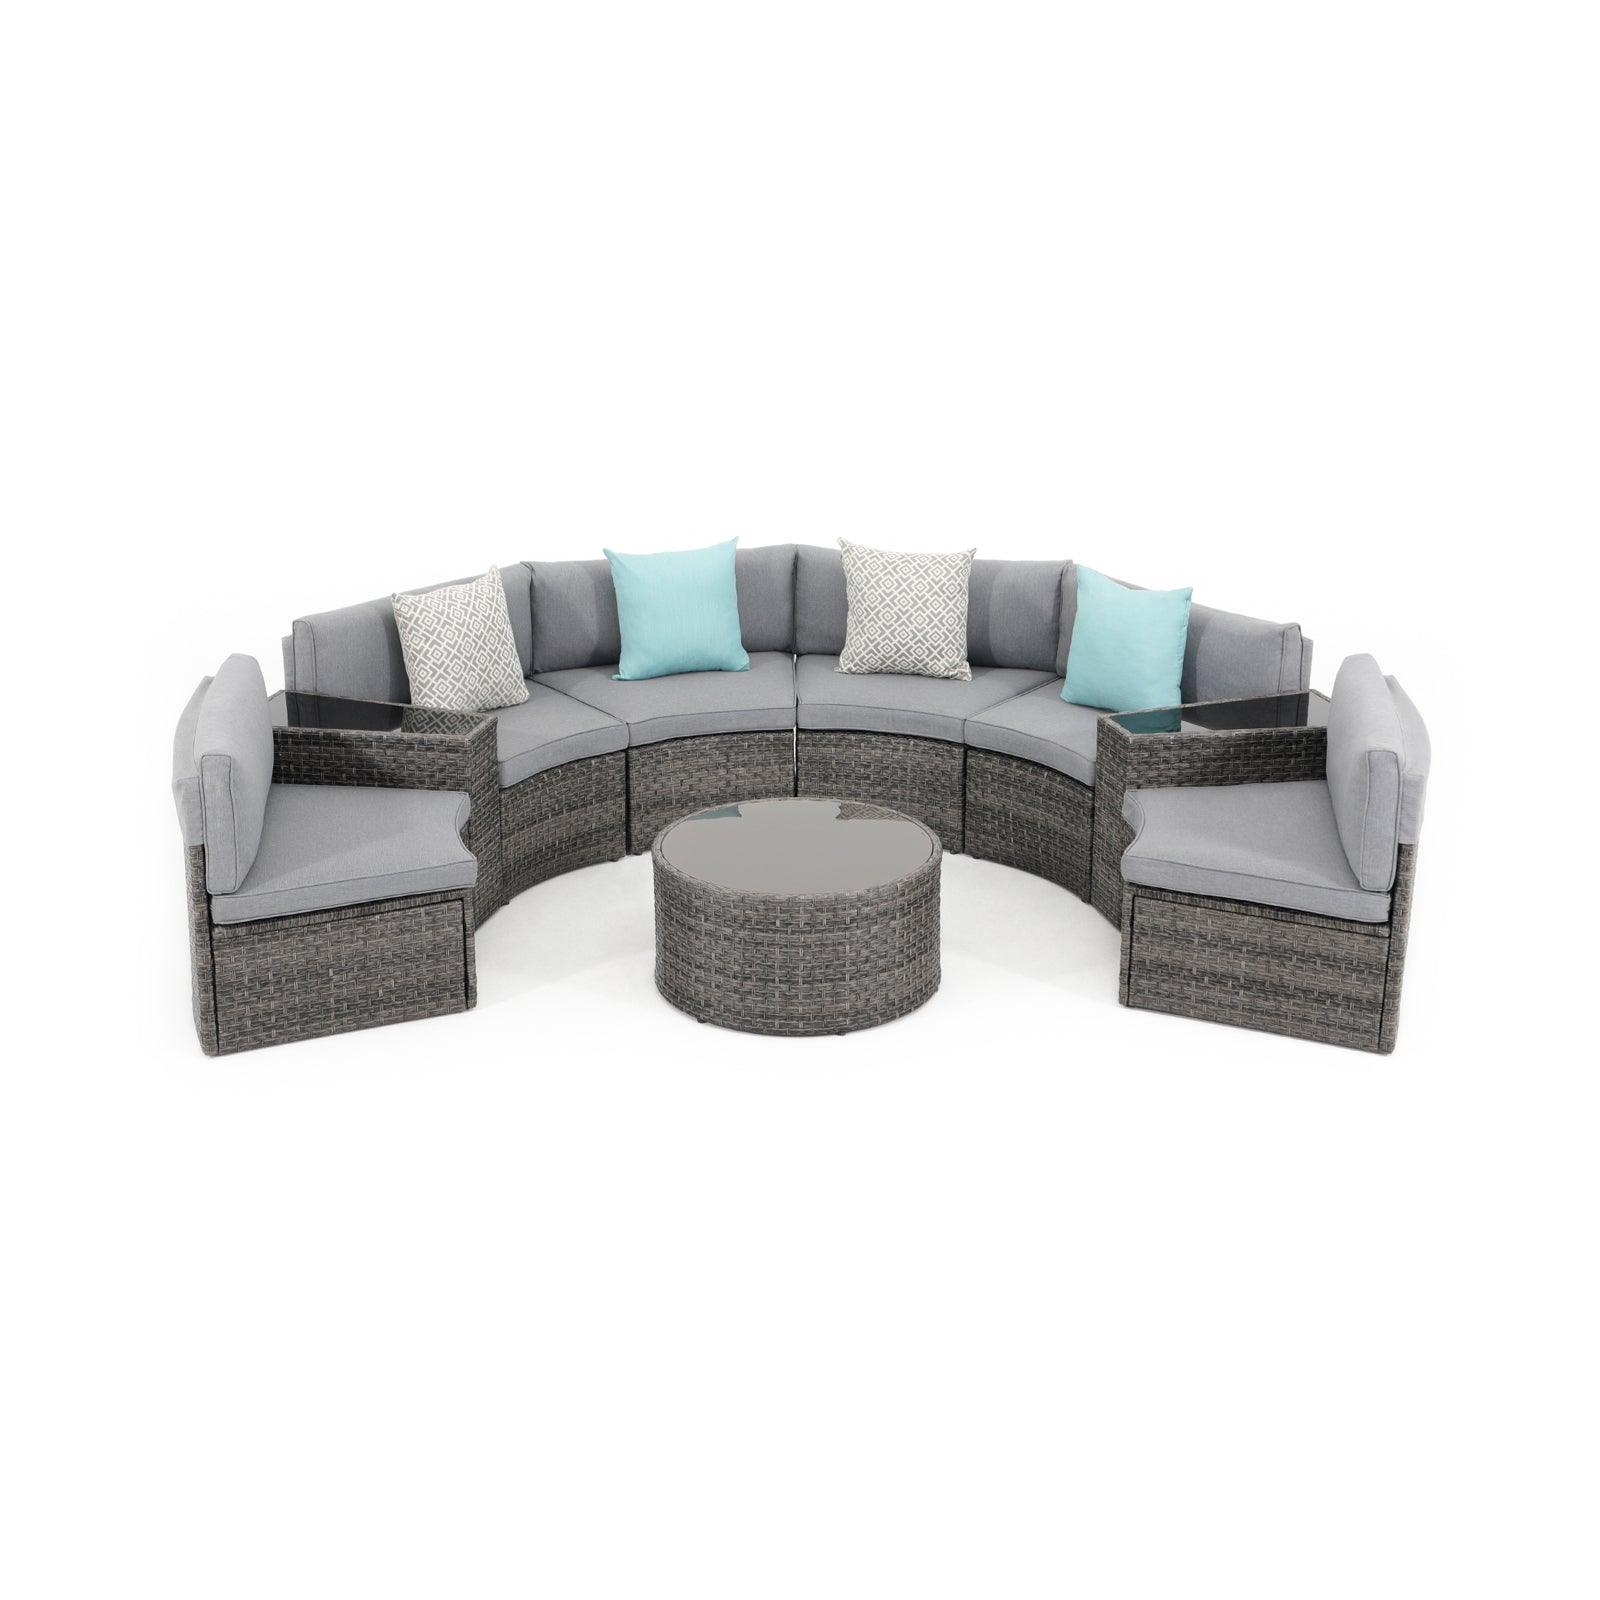 Boboli 9-piece Grey Wicker Curved Sectional Set with grey cushions, 1 Round Glass Table + 2 glass top side tables + 6 sectional sofas, front- Jardina Furniture #color_Grey #piece_9-pc.